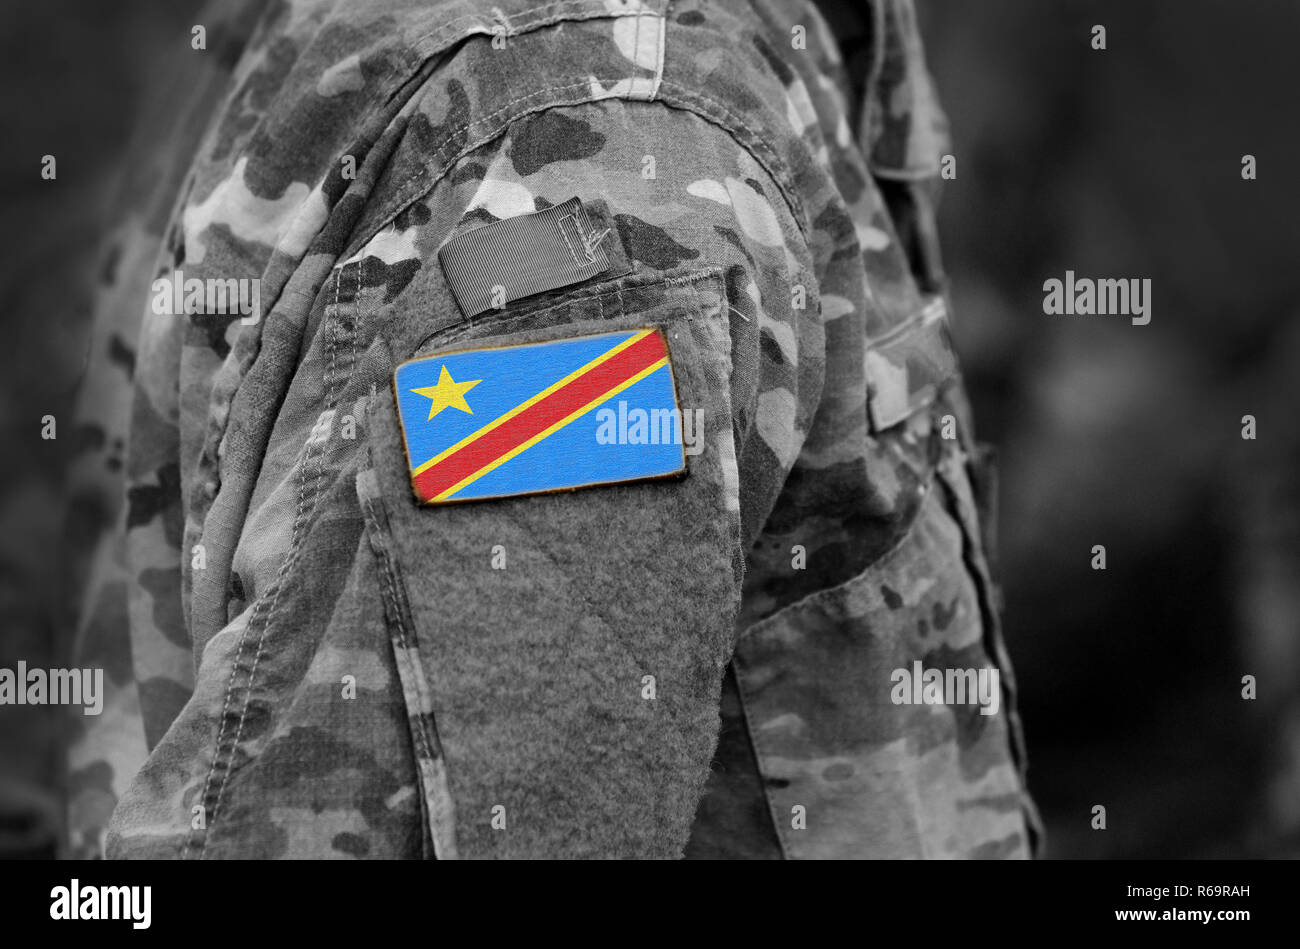 Democratic Republic of the Congo flag on soldiers arm. Army, troops, military, Africa (collage). Stock Photo